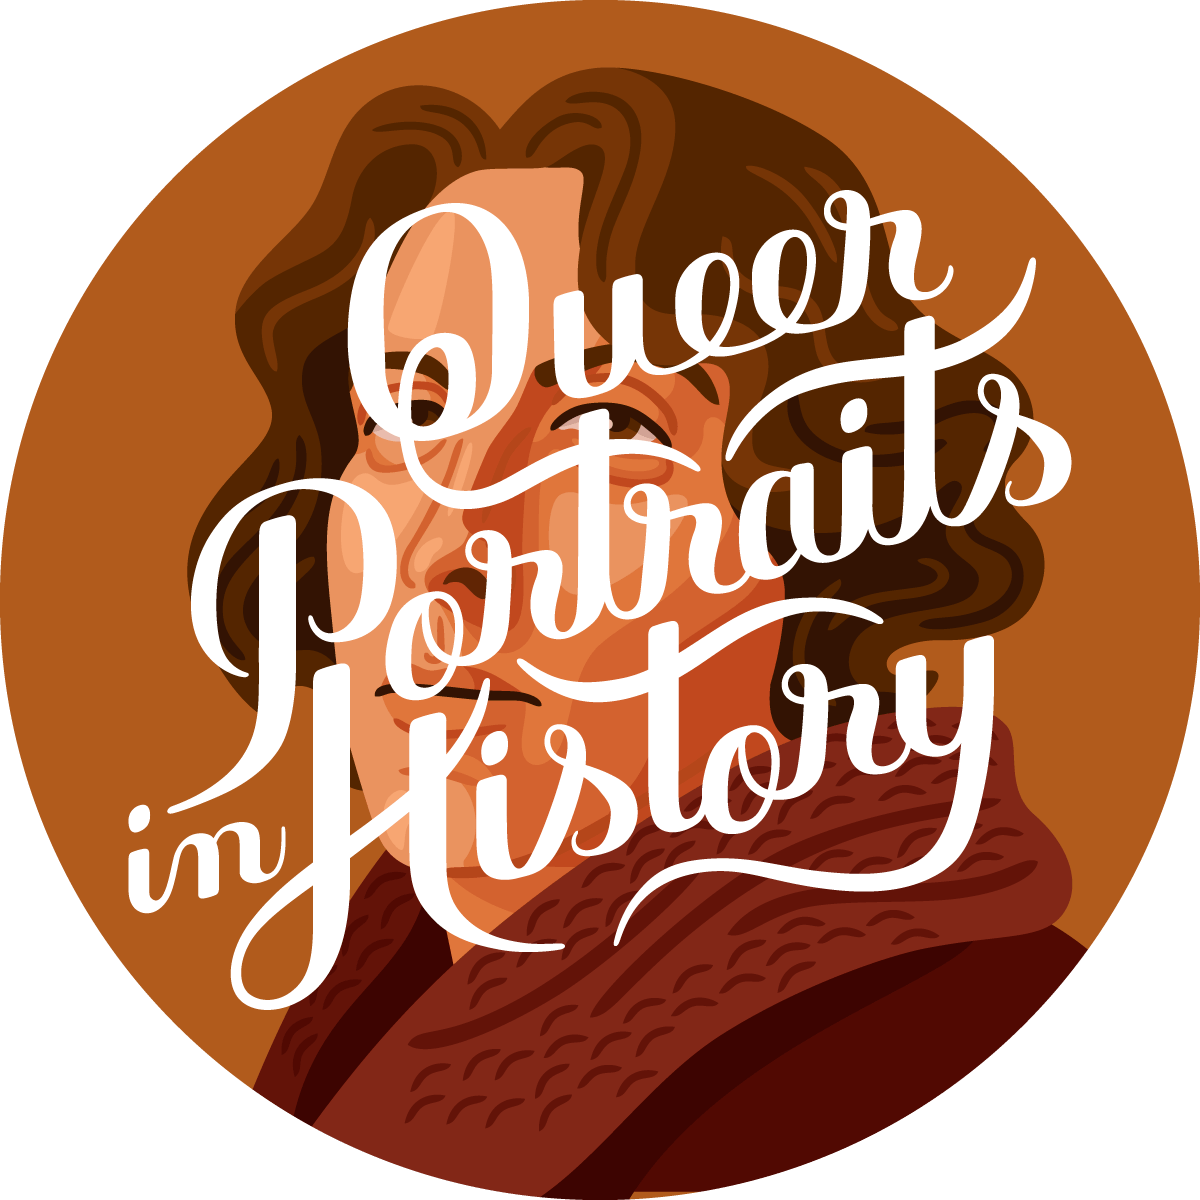 Queer Portraits in History - Oliver Sacks